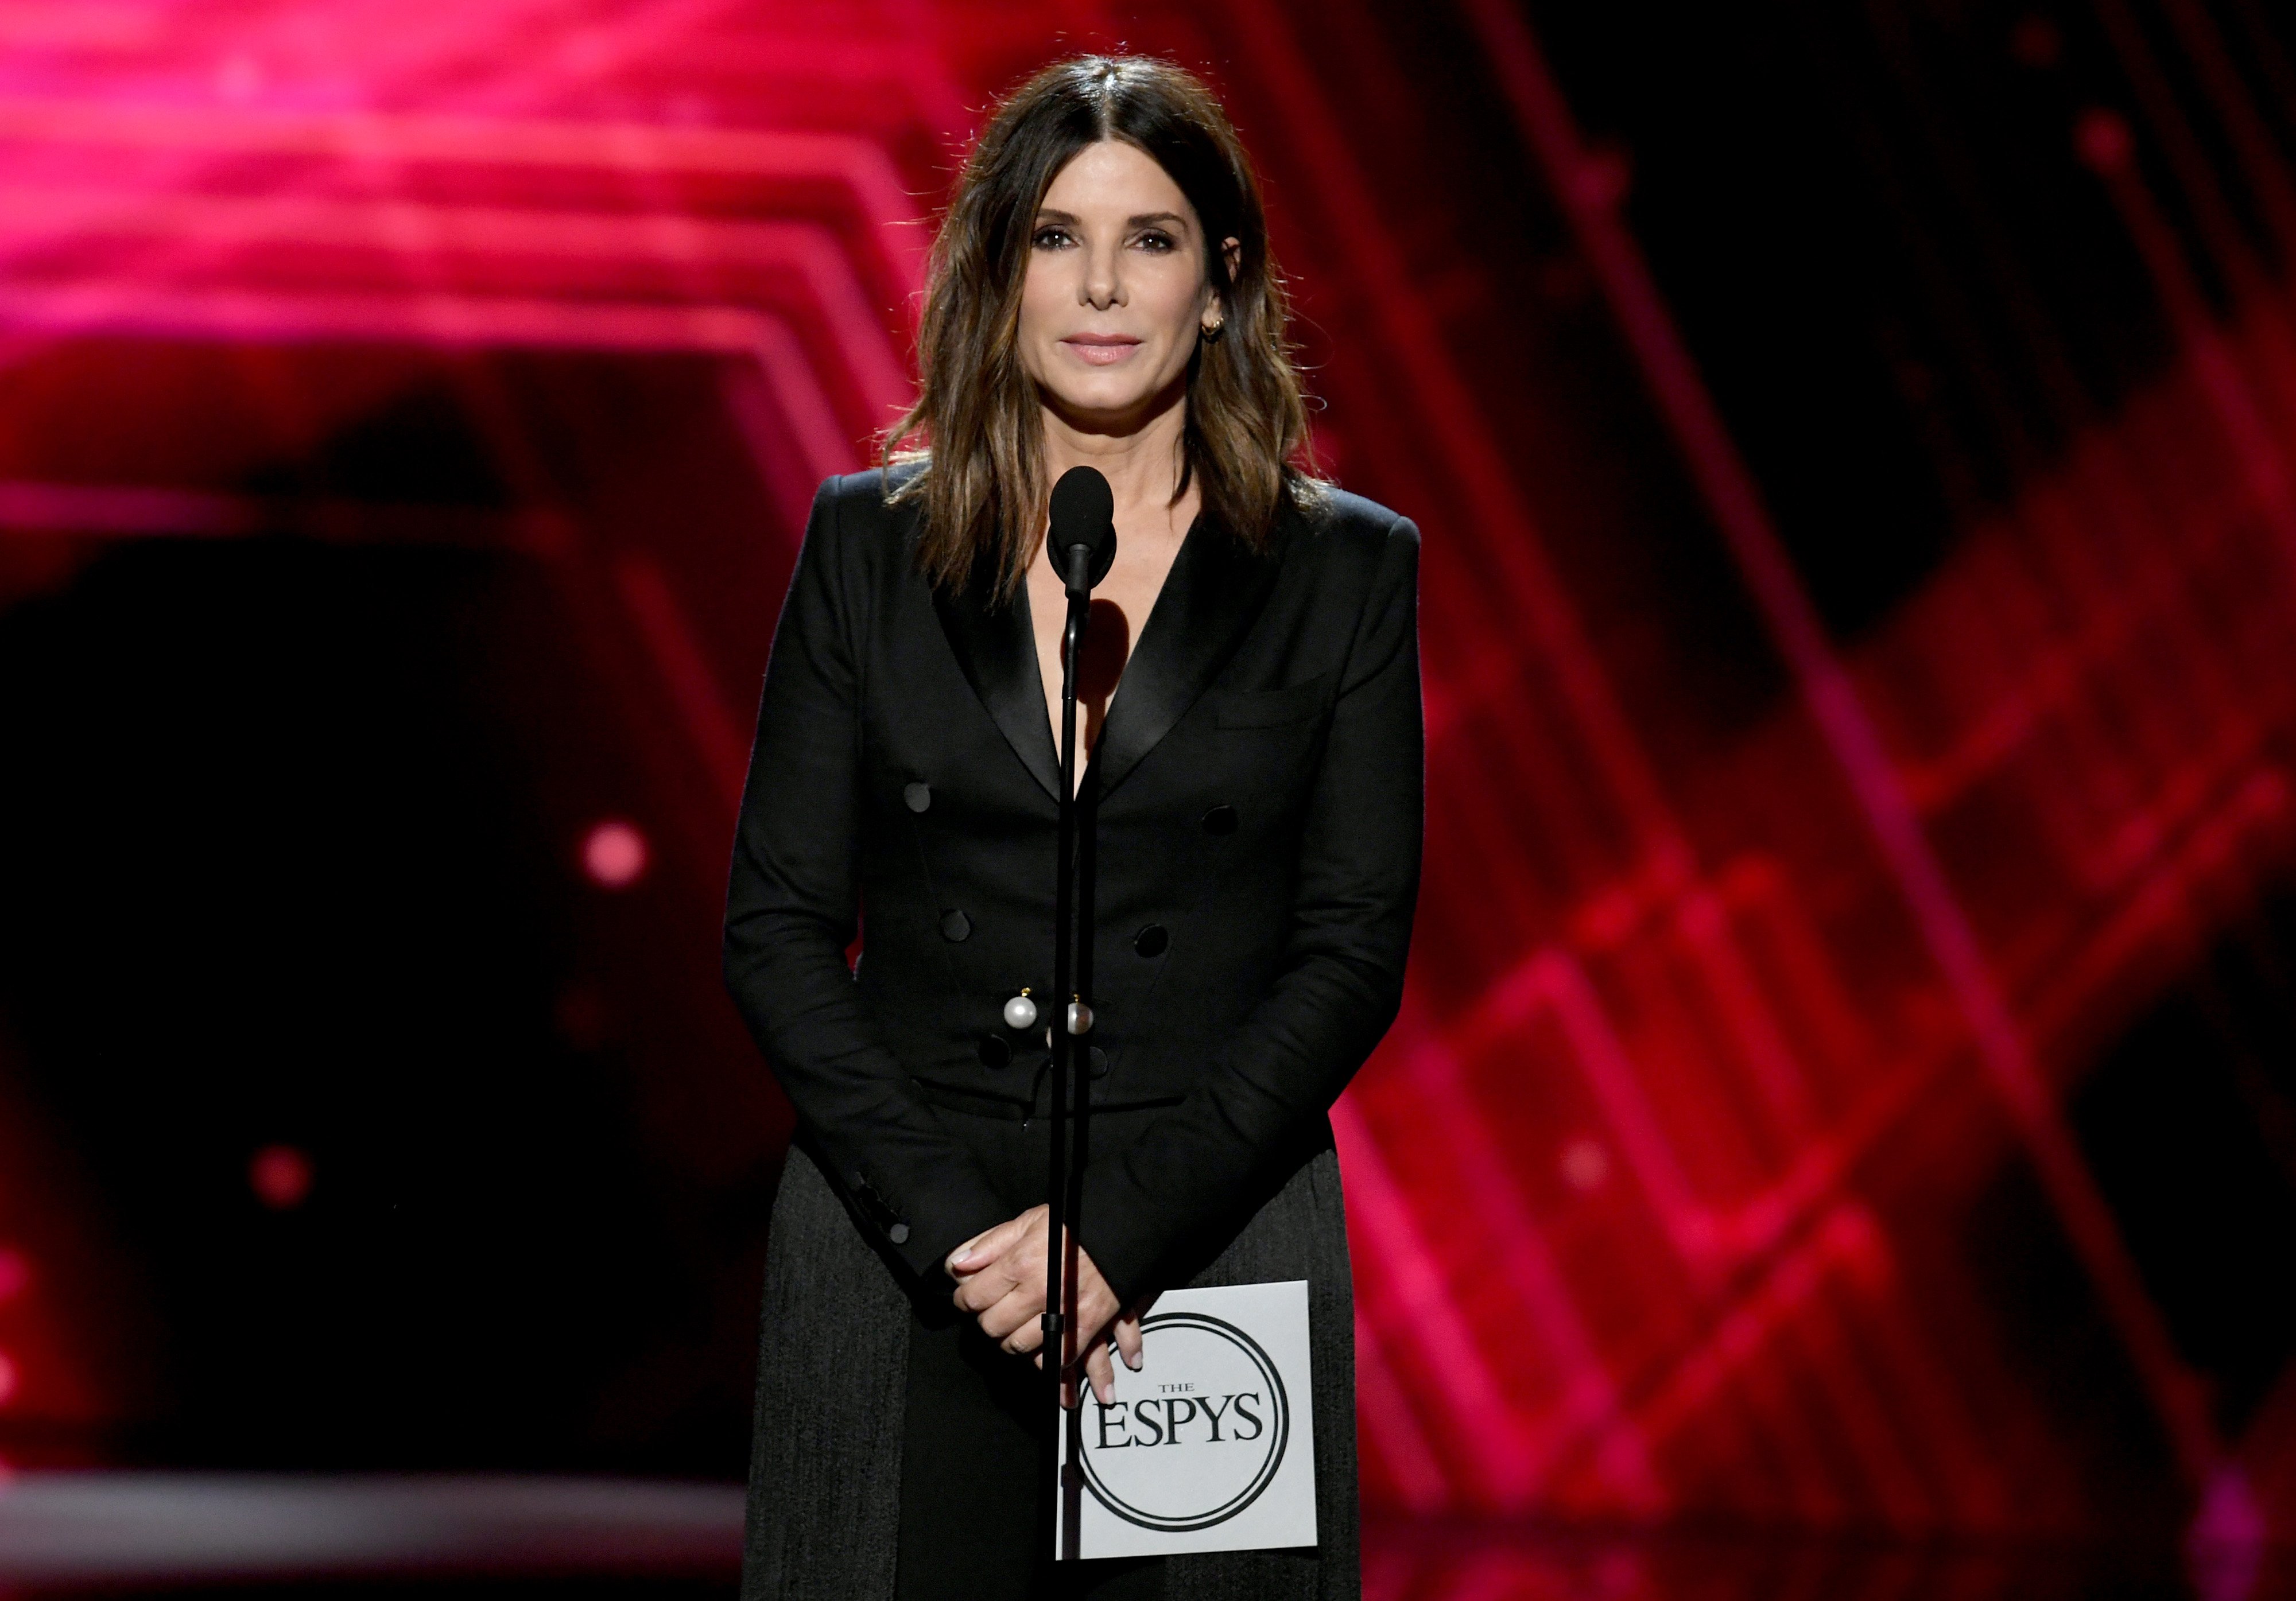 Sandra Bullock speaking onstage during The 2019 ESPYs at Microsoft Theater on July 10, 2019 in Los Angeles, California. | Source: Getty Images